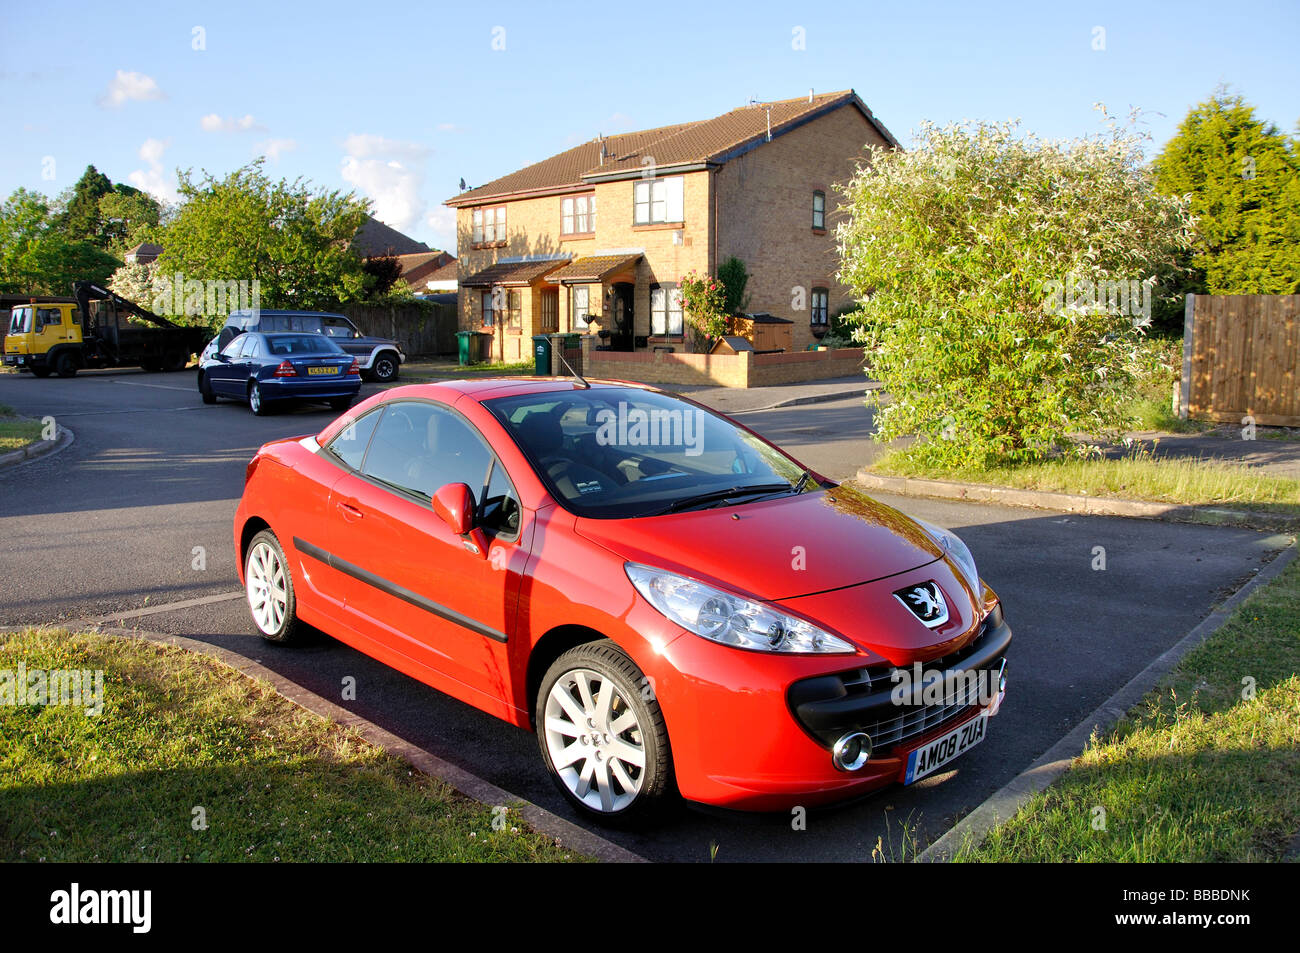 Car parked outside house, Meadow View, Stanwell Moor, Surrey, England, United Kingdom Stock Photo